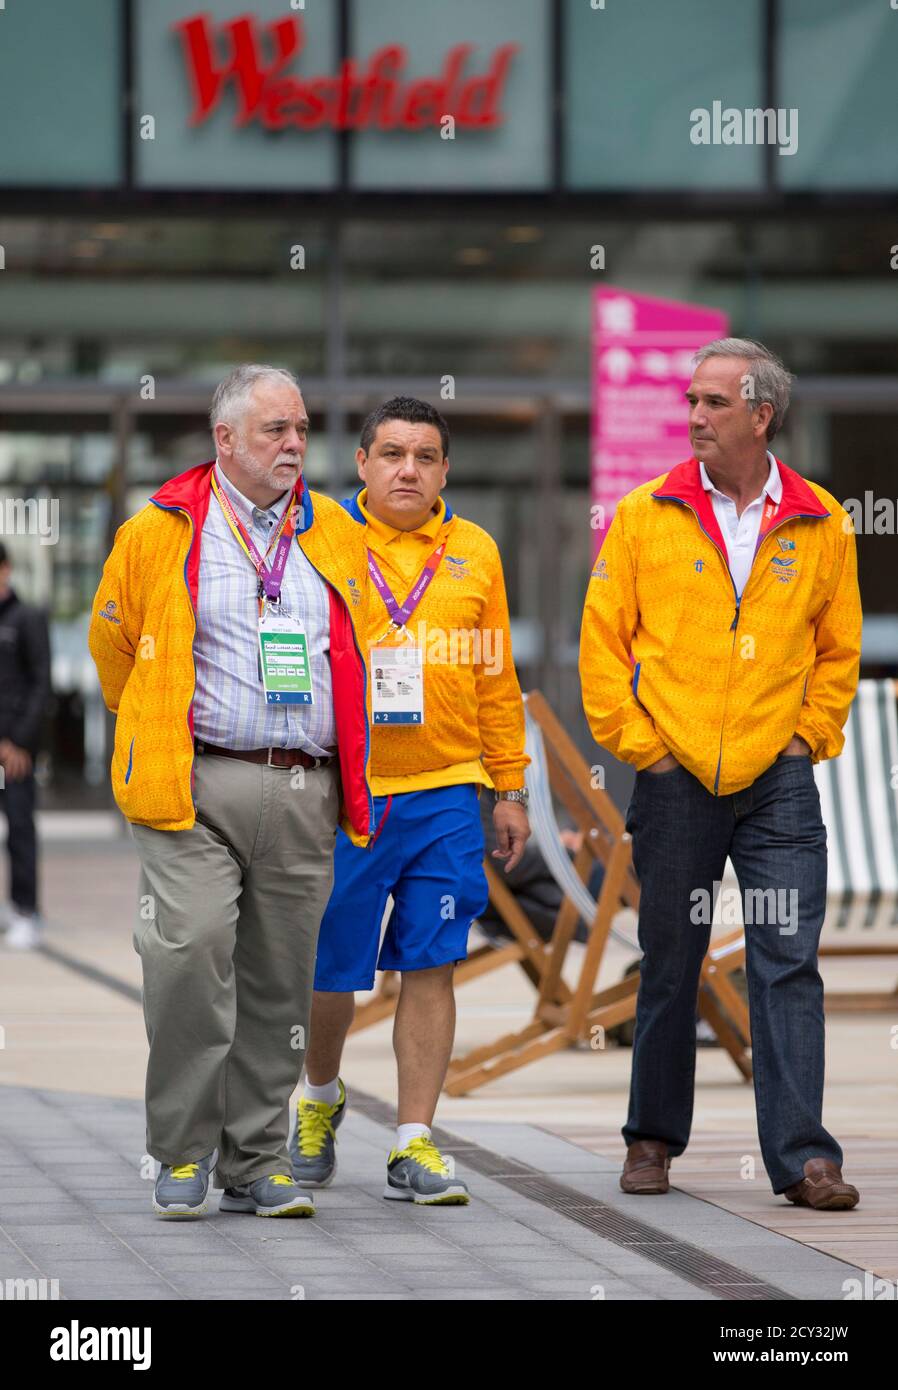 Members of the Colombian Olympic Team walk in the Westfield Shopping Centre, a major gateway for visitors to the London 2012 Olympic Park, in Stratford, east London, July 19, 2012. REUTERS/Neil Hall (BRITAIN - Tags: SPORT OLYMPICS) Stock Photo